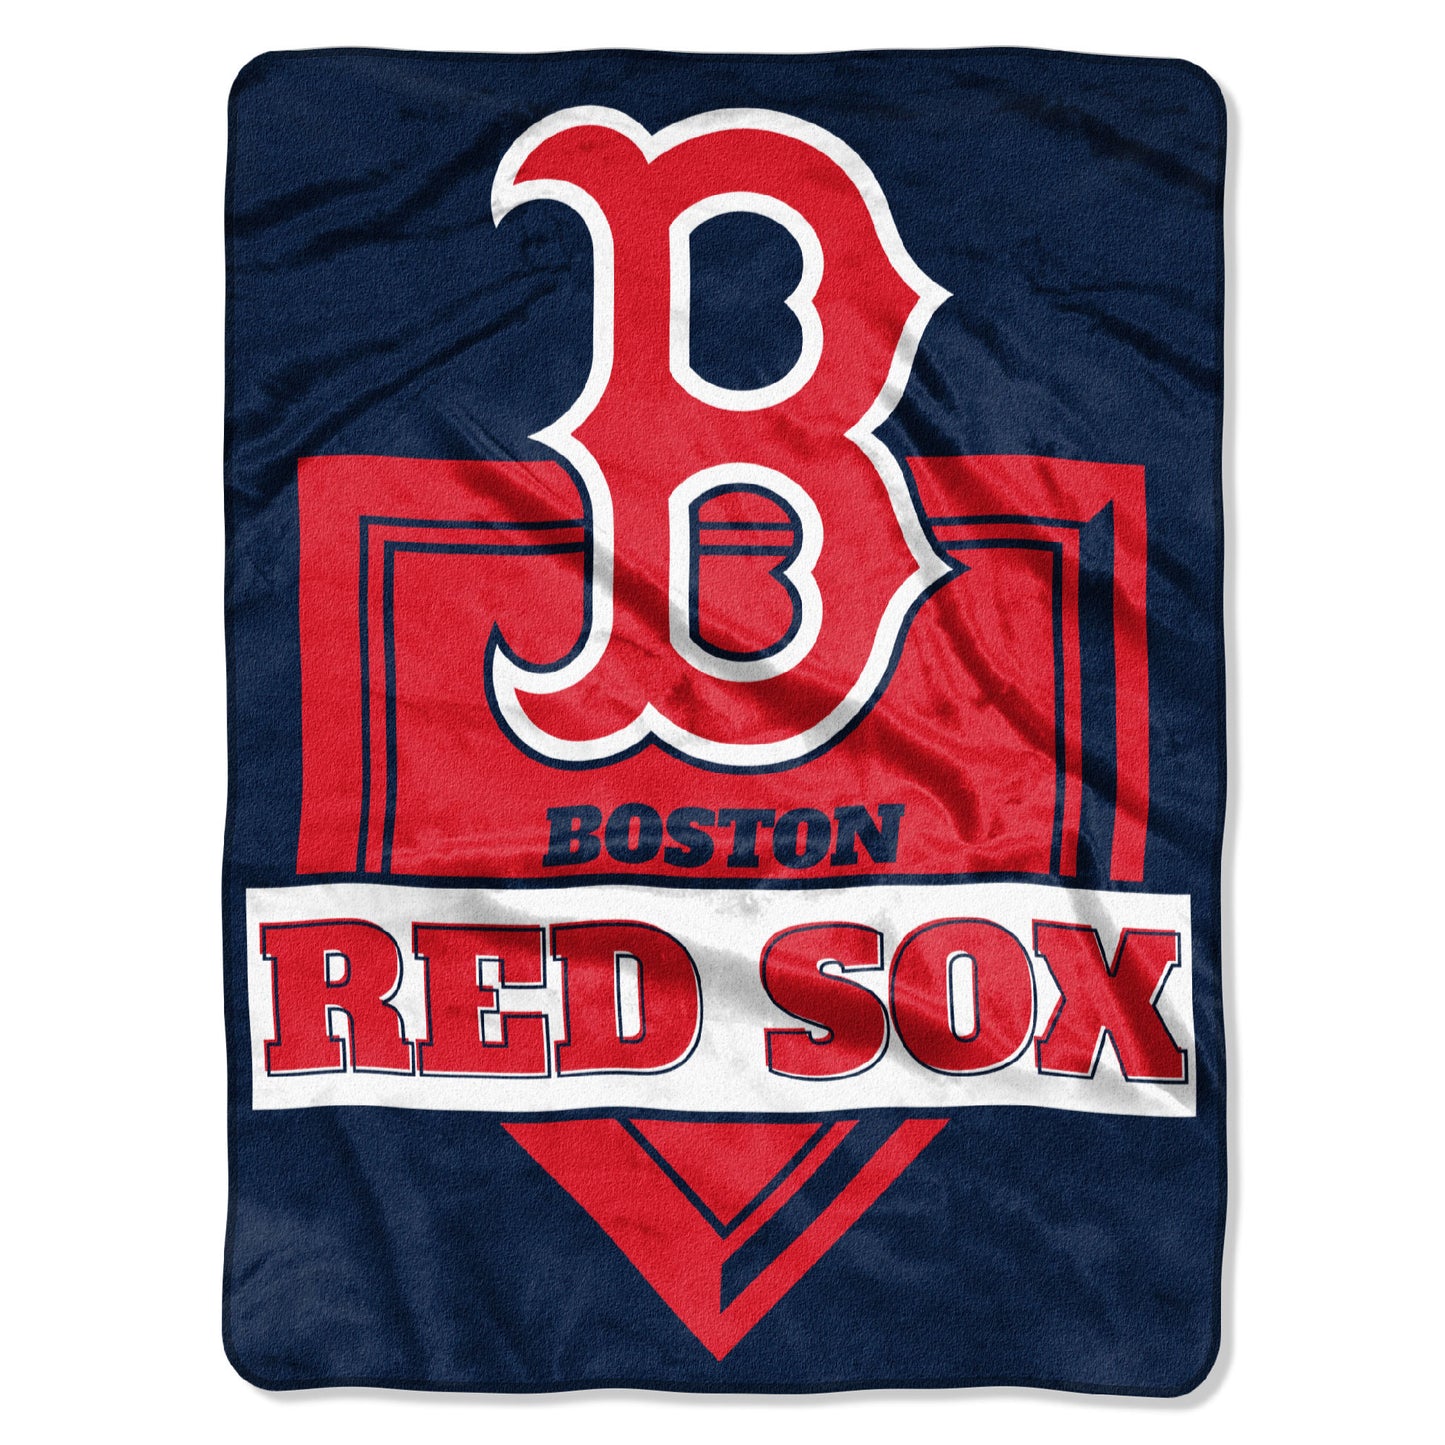 Red Sox OFFICIAL Major League Baseball; "Home Plate" 60"x 80" Raschel Throw by The Northwest Company